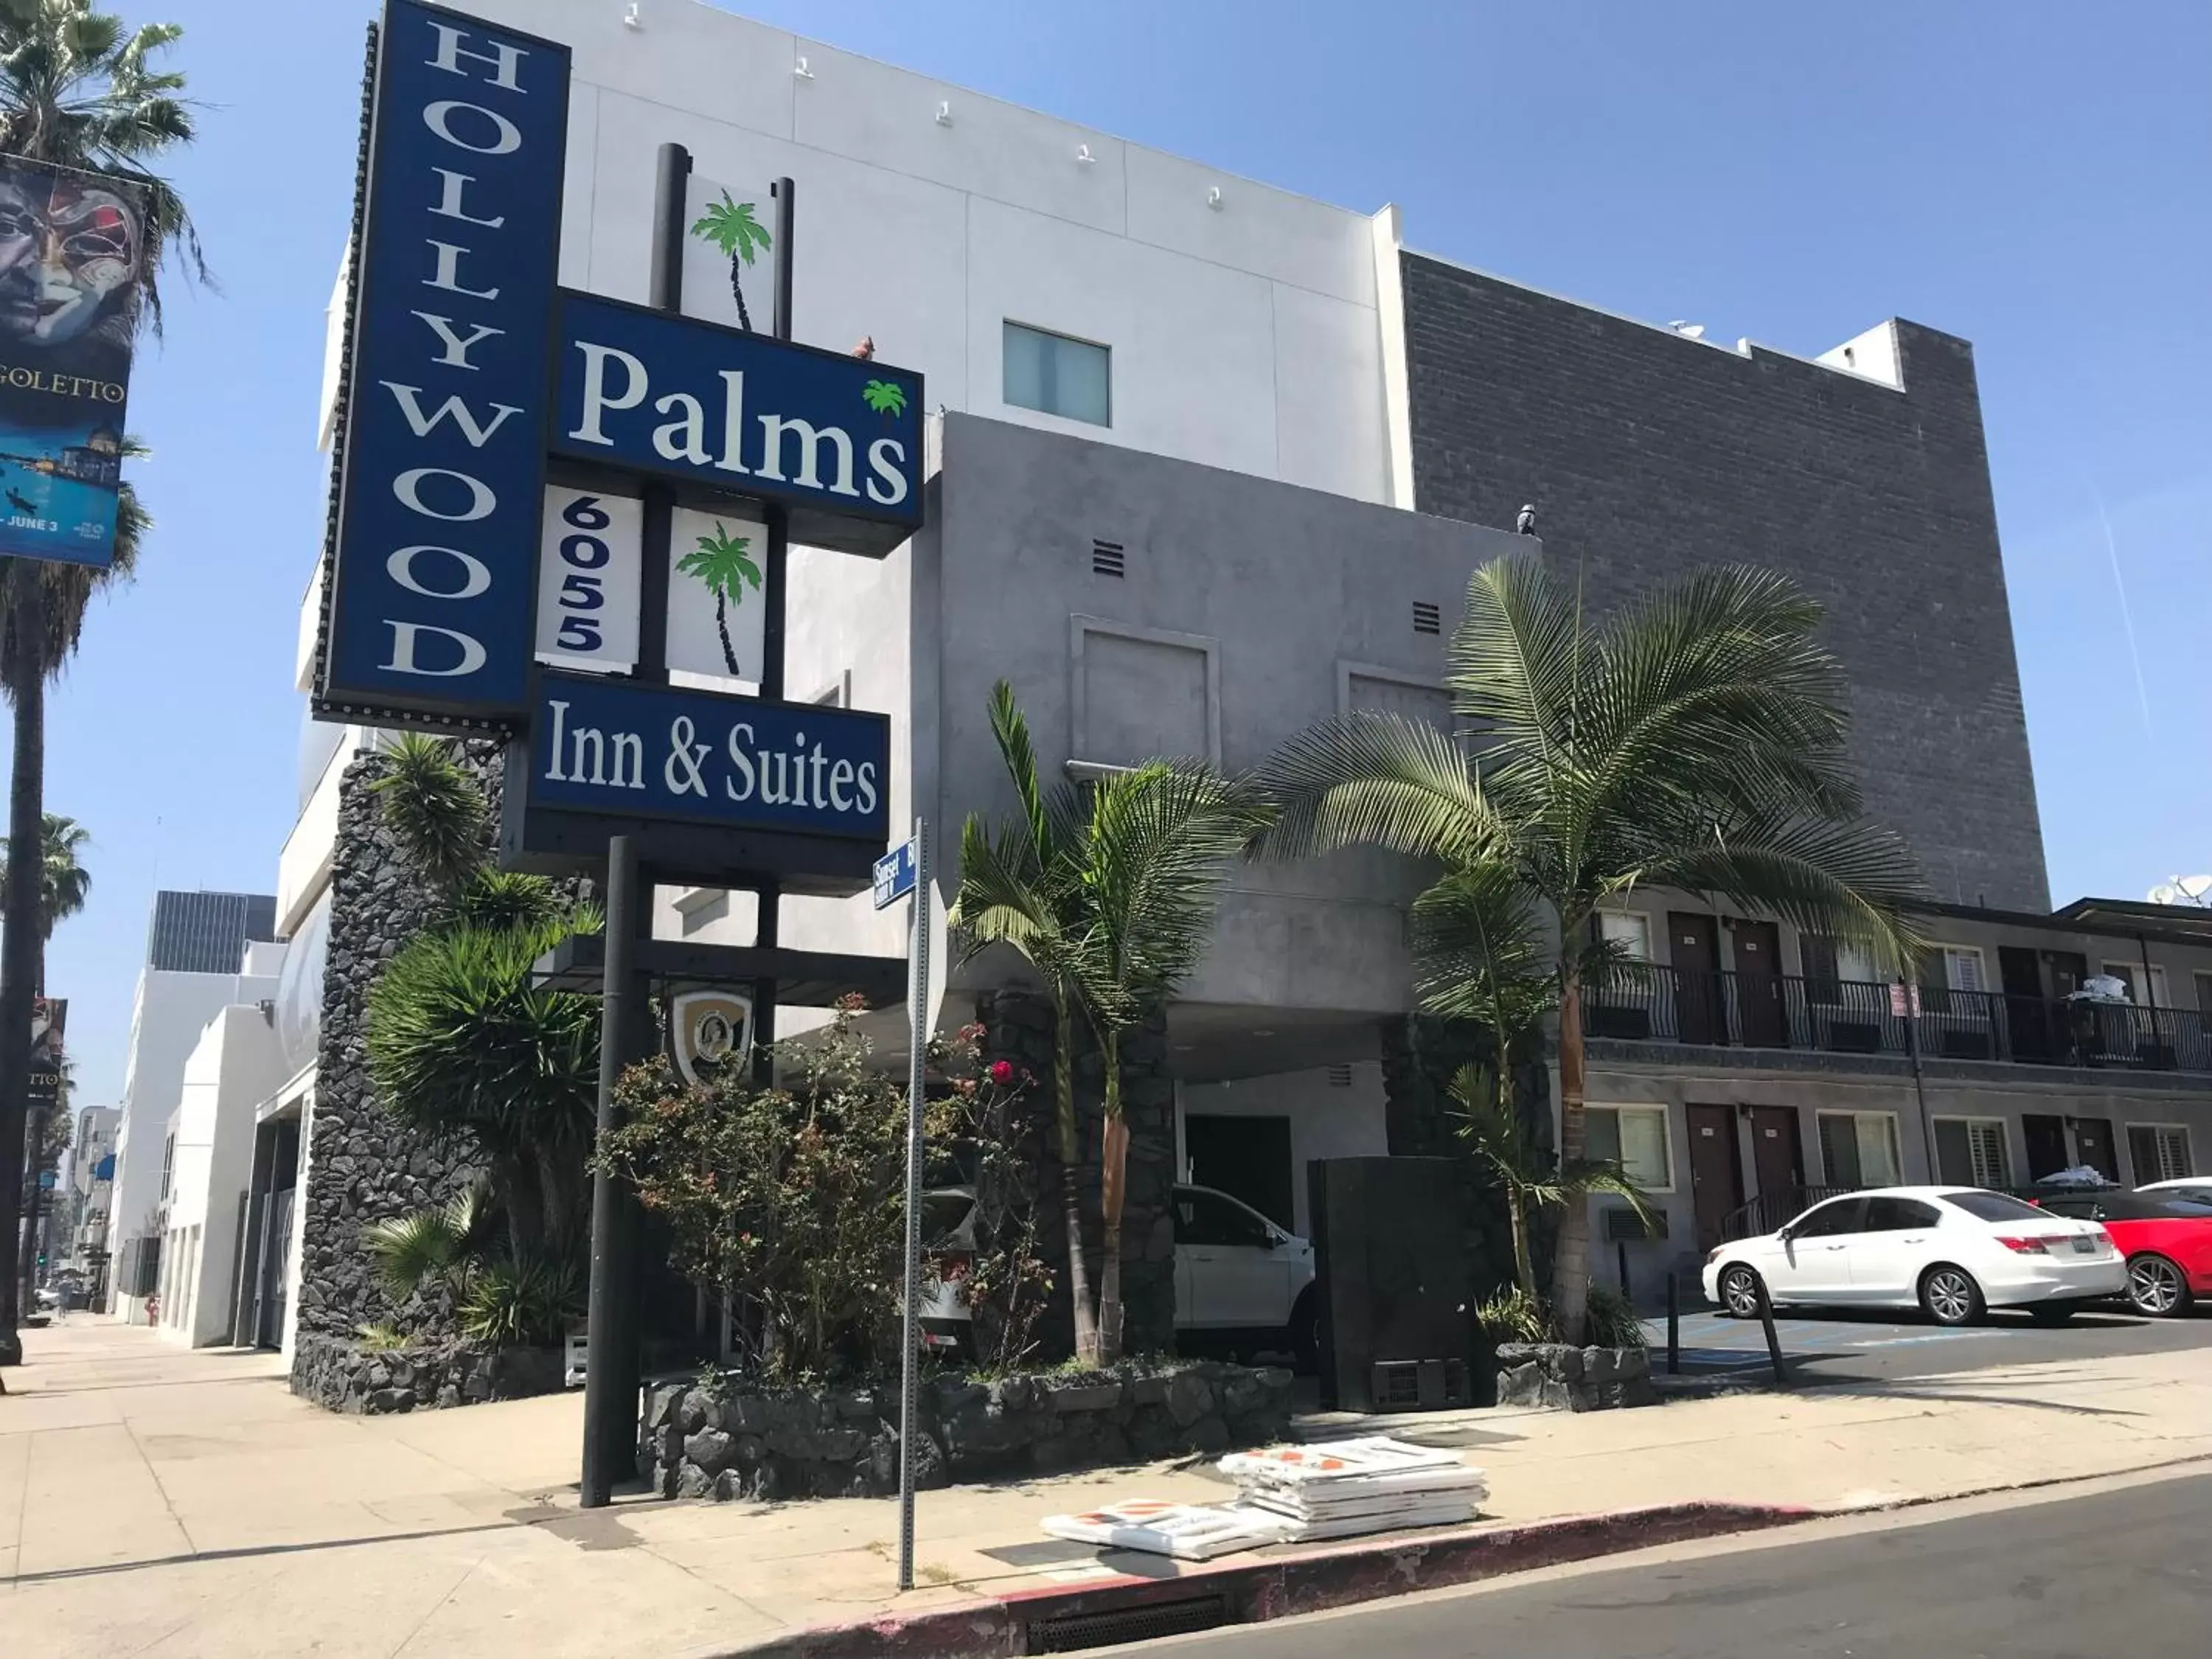 Property Building in Hollywood Palms Inns & Suites